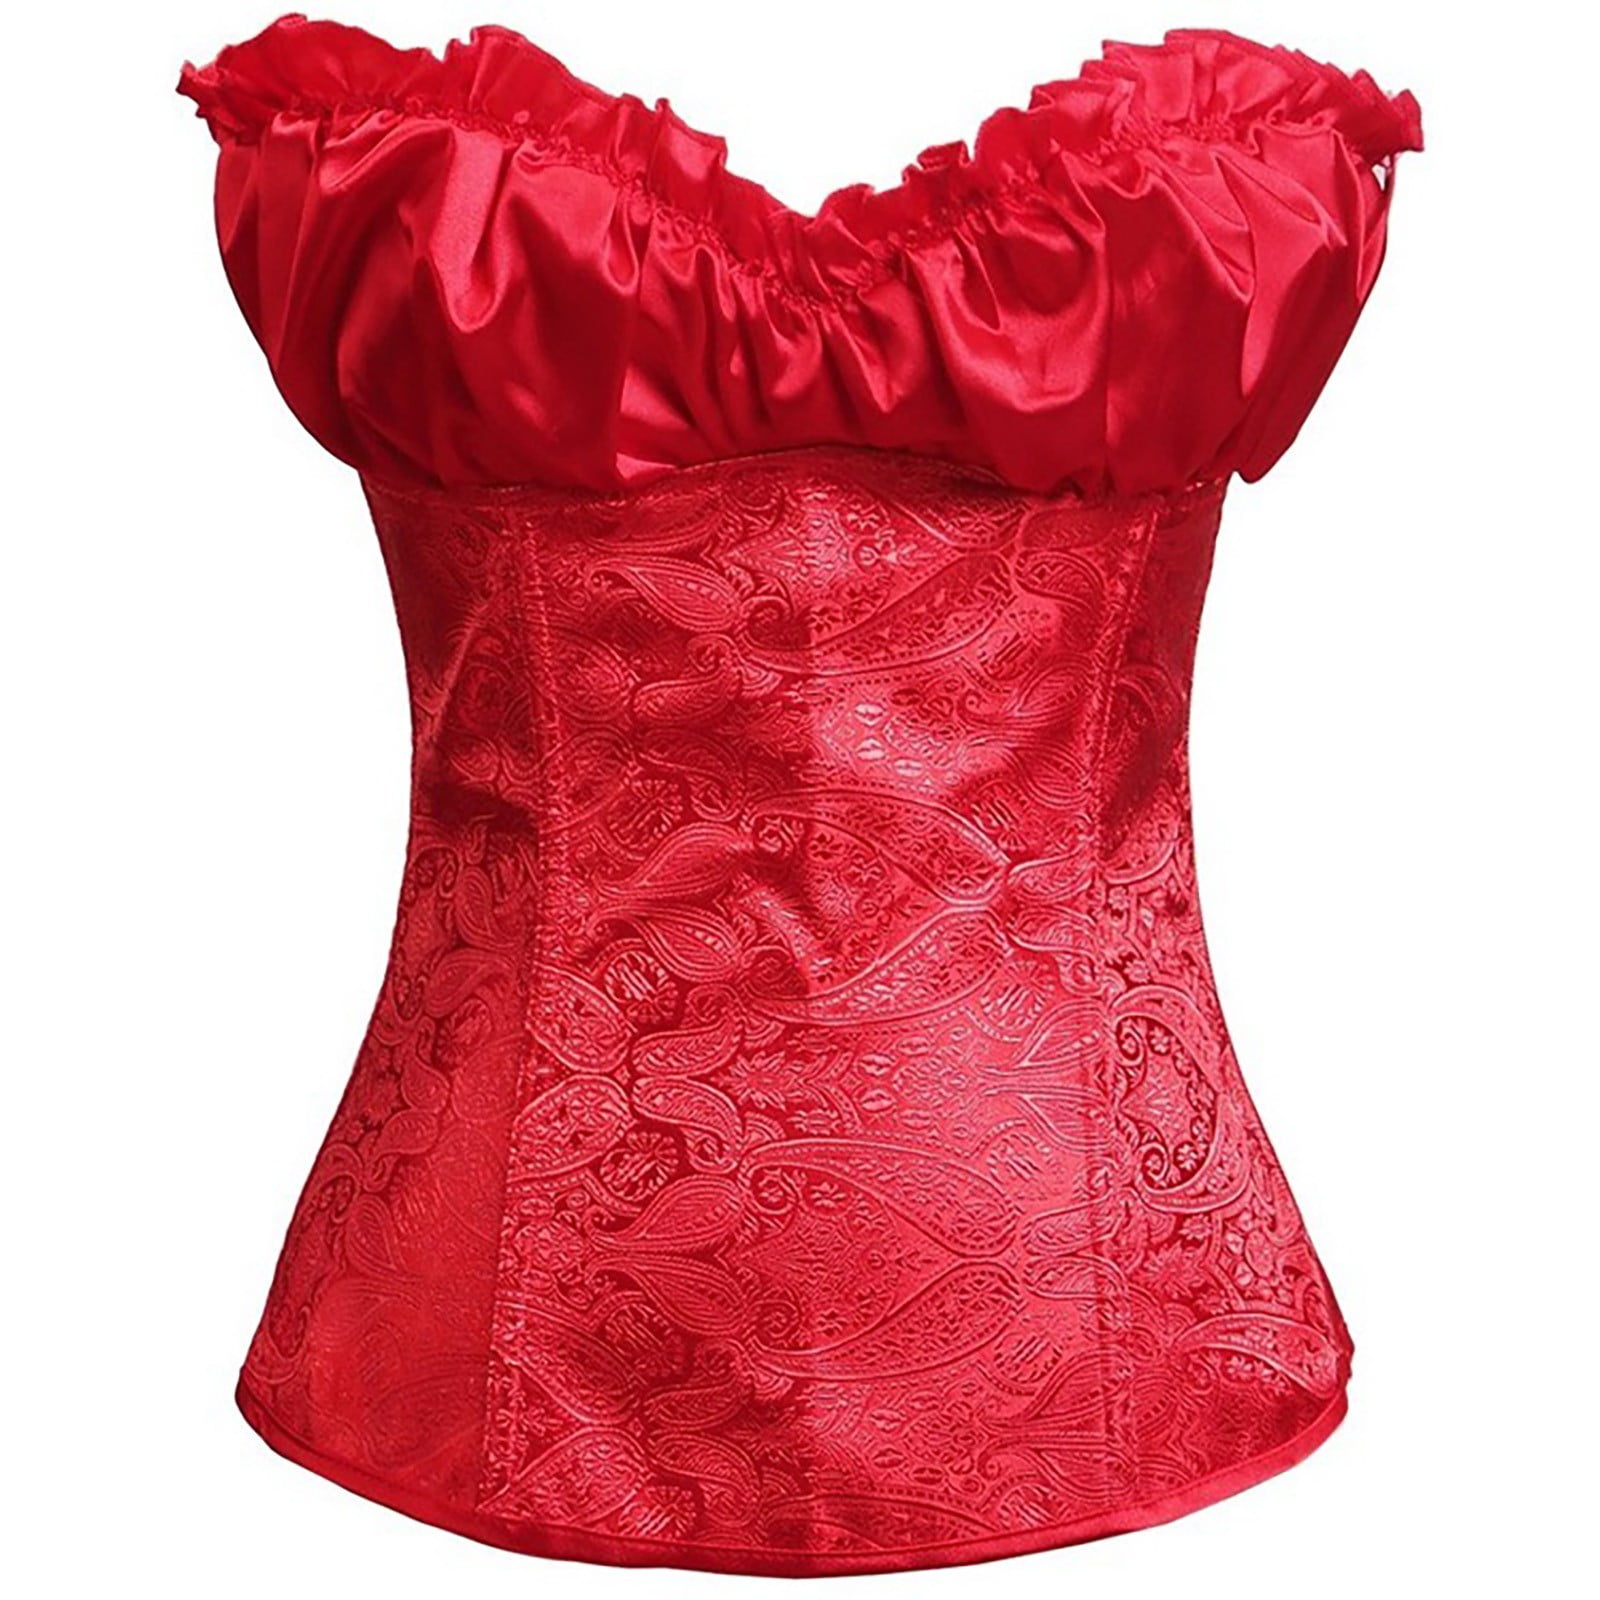 LBECLEY Shorts To Wear Under Dresses Corset Tops for Women Bustier